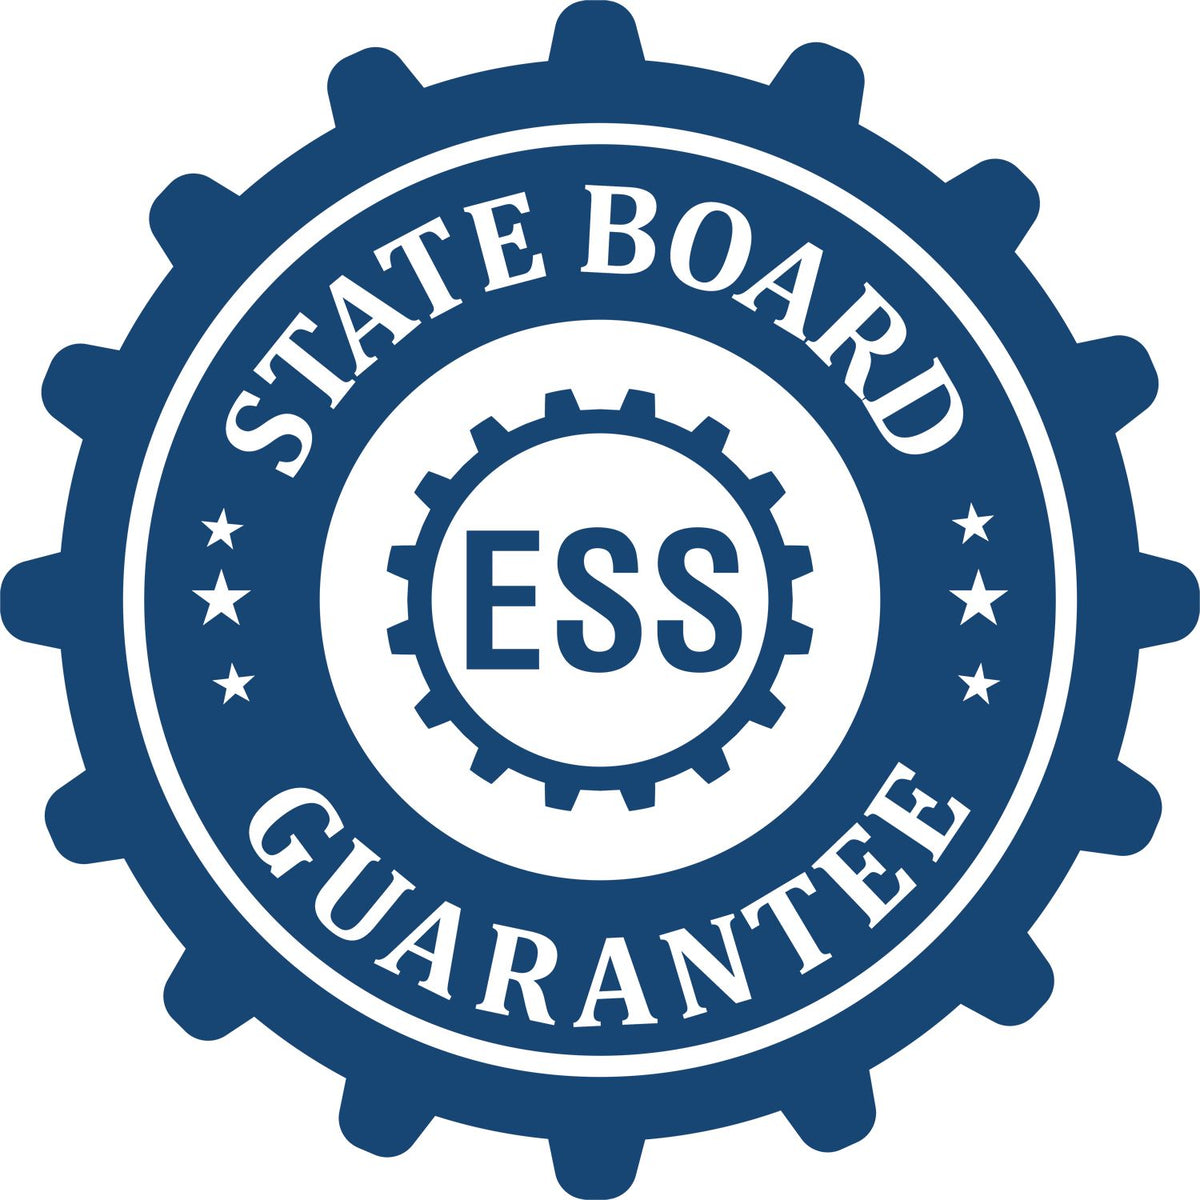 An emblem in a gear shape illustrating a state board guarantee for the State of New Jersey Long Reach Architectural Embossing Seal product.